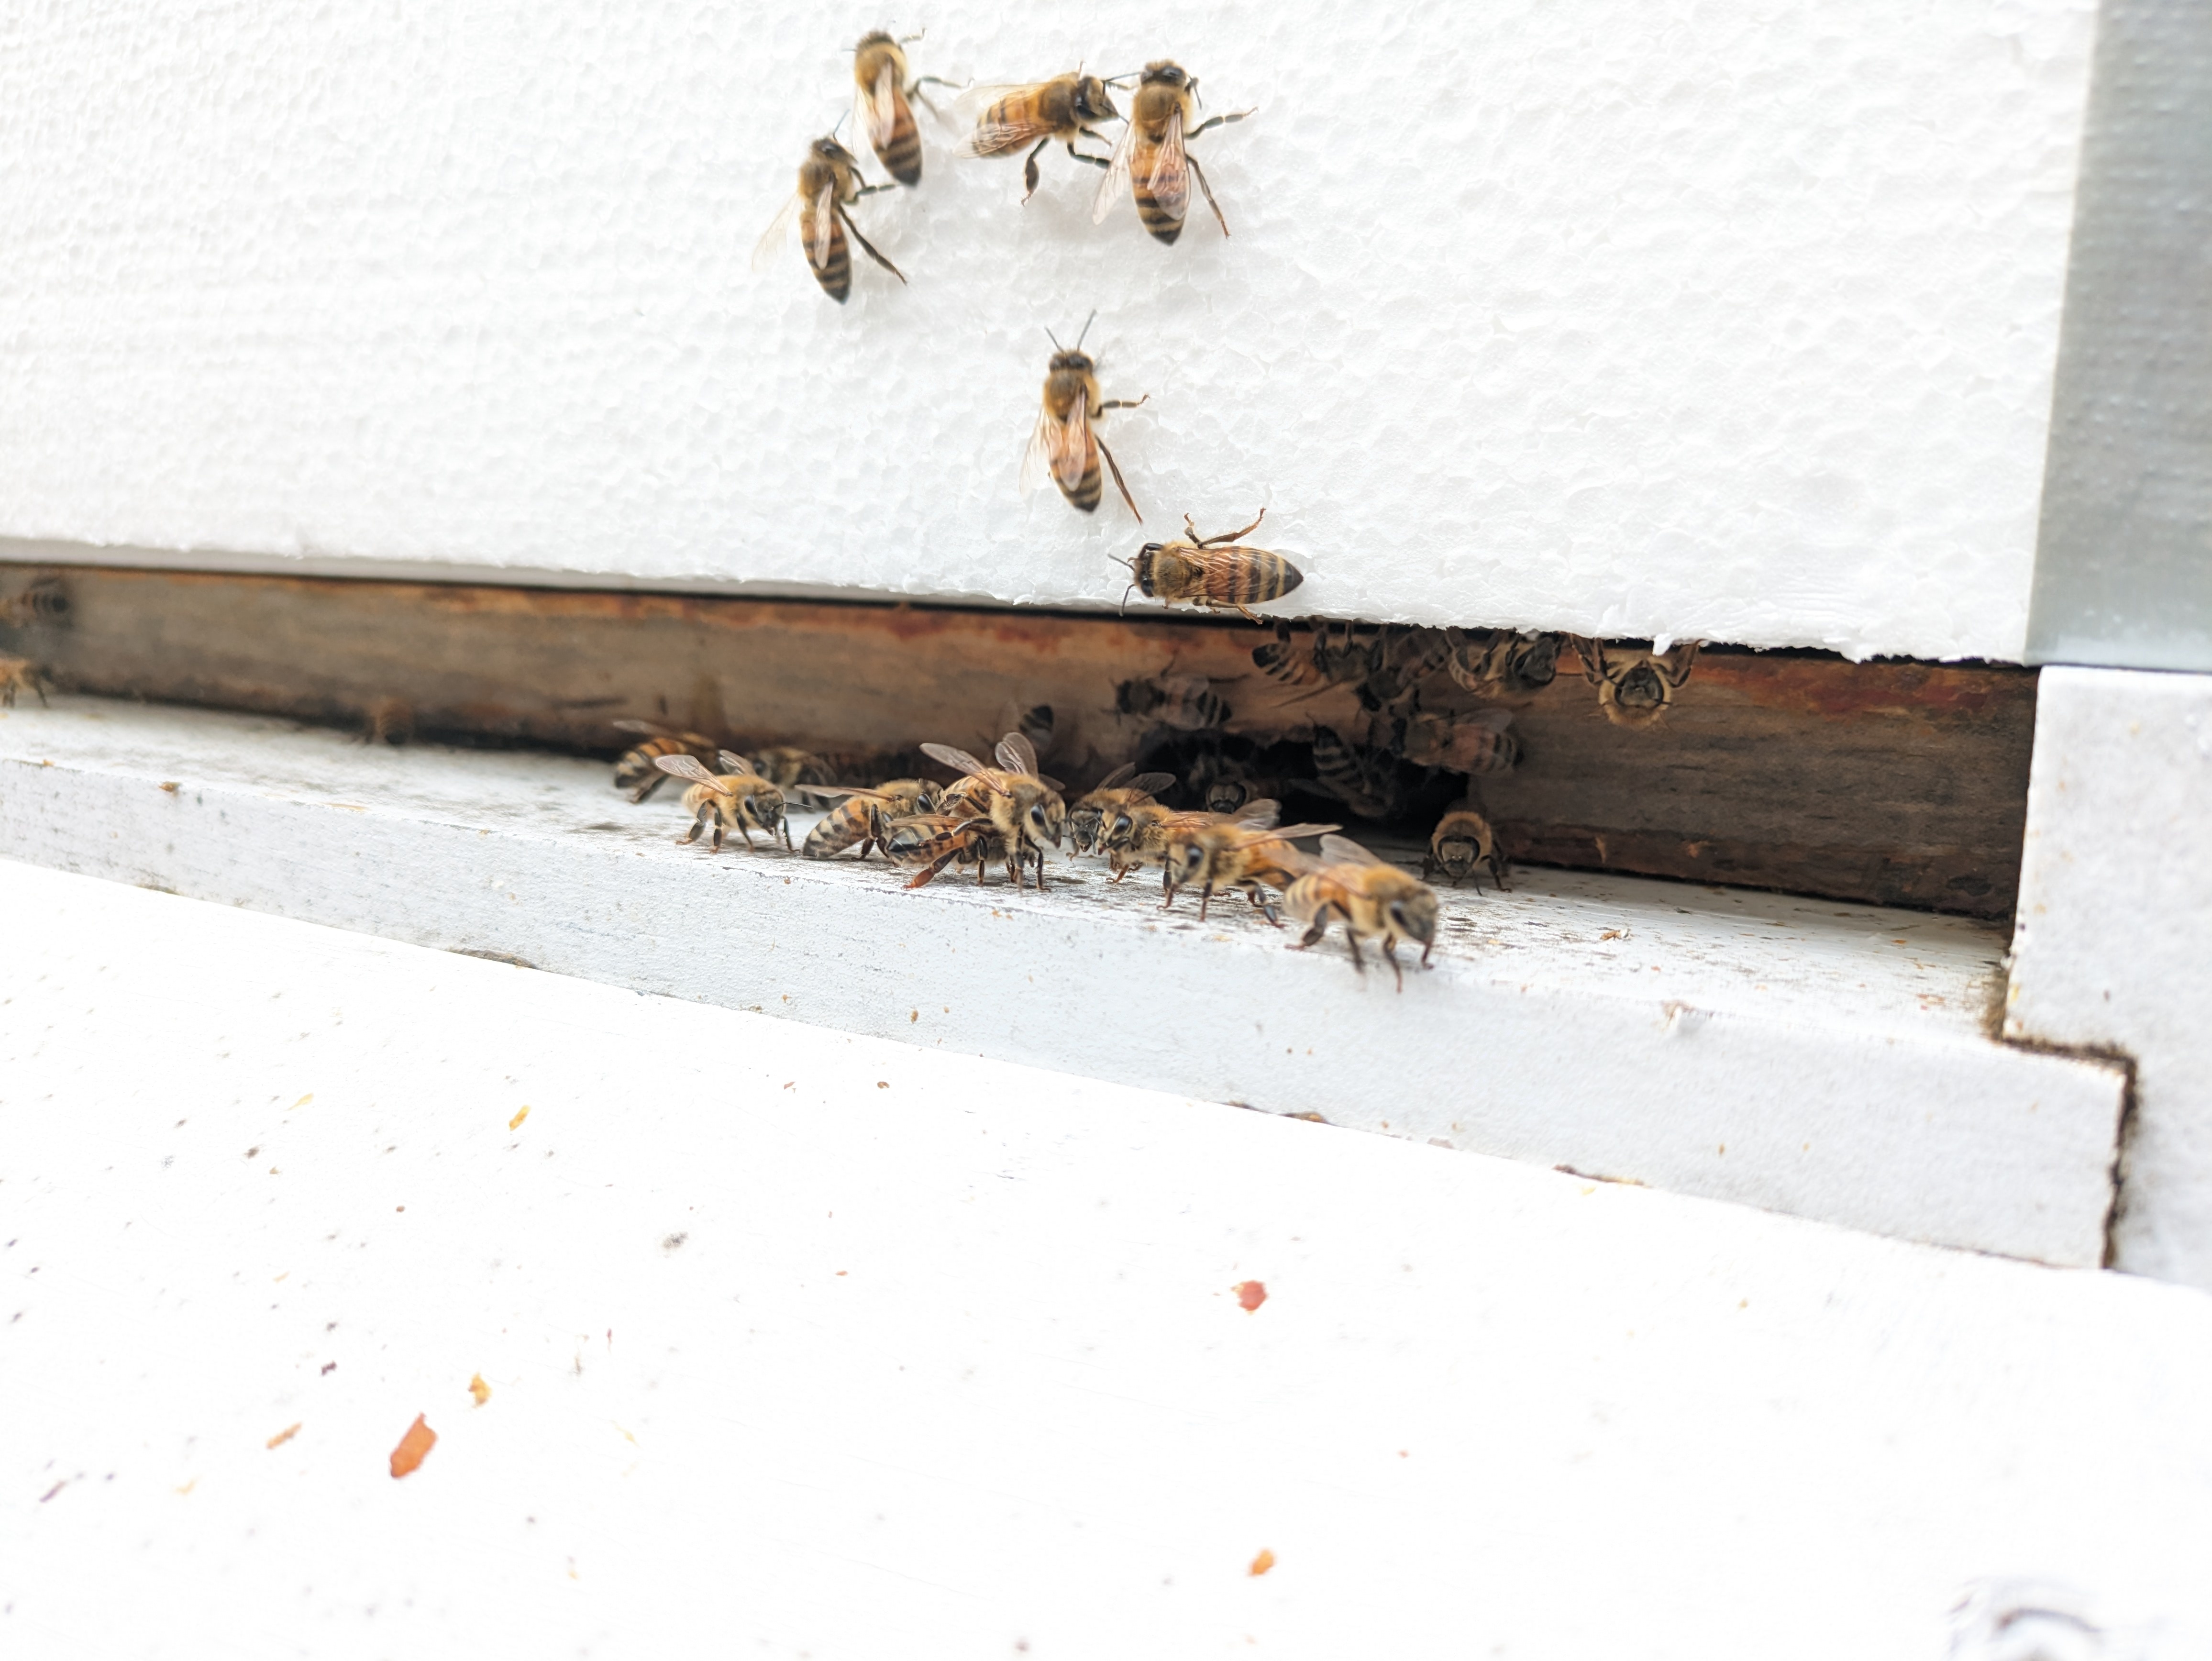 honey bees congregating at the hive entrance on a warm day